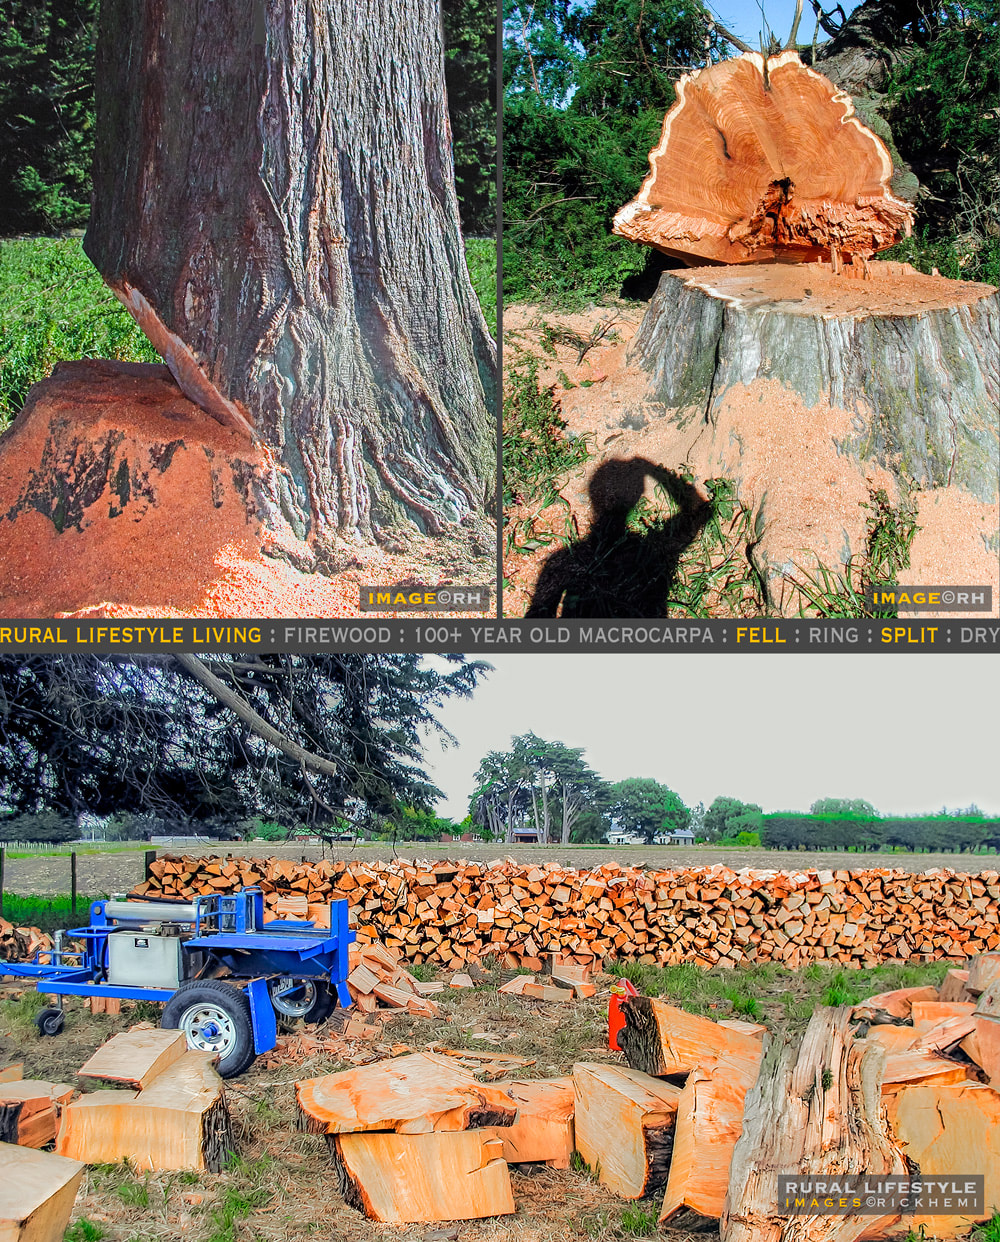 rural lifestyle living, firewood supply, images by Rick Hemi, about page Rick Hemi